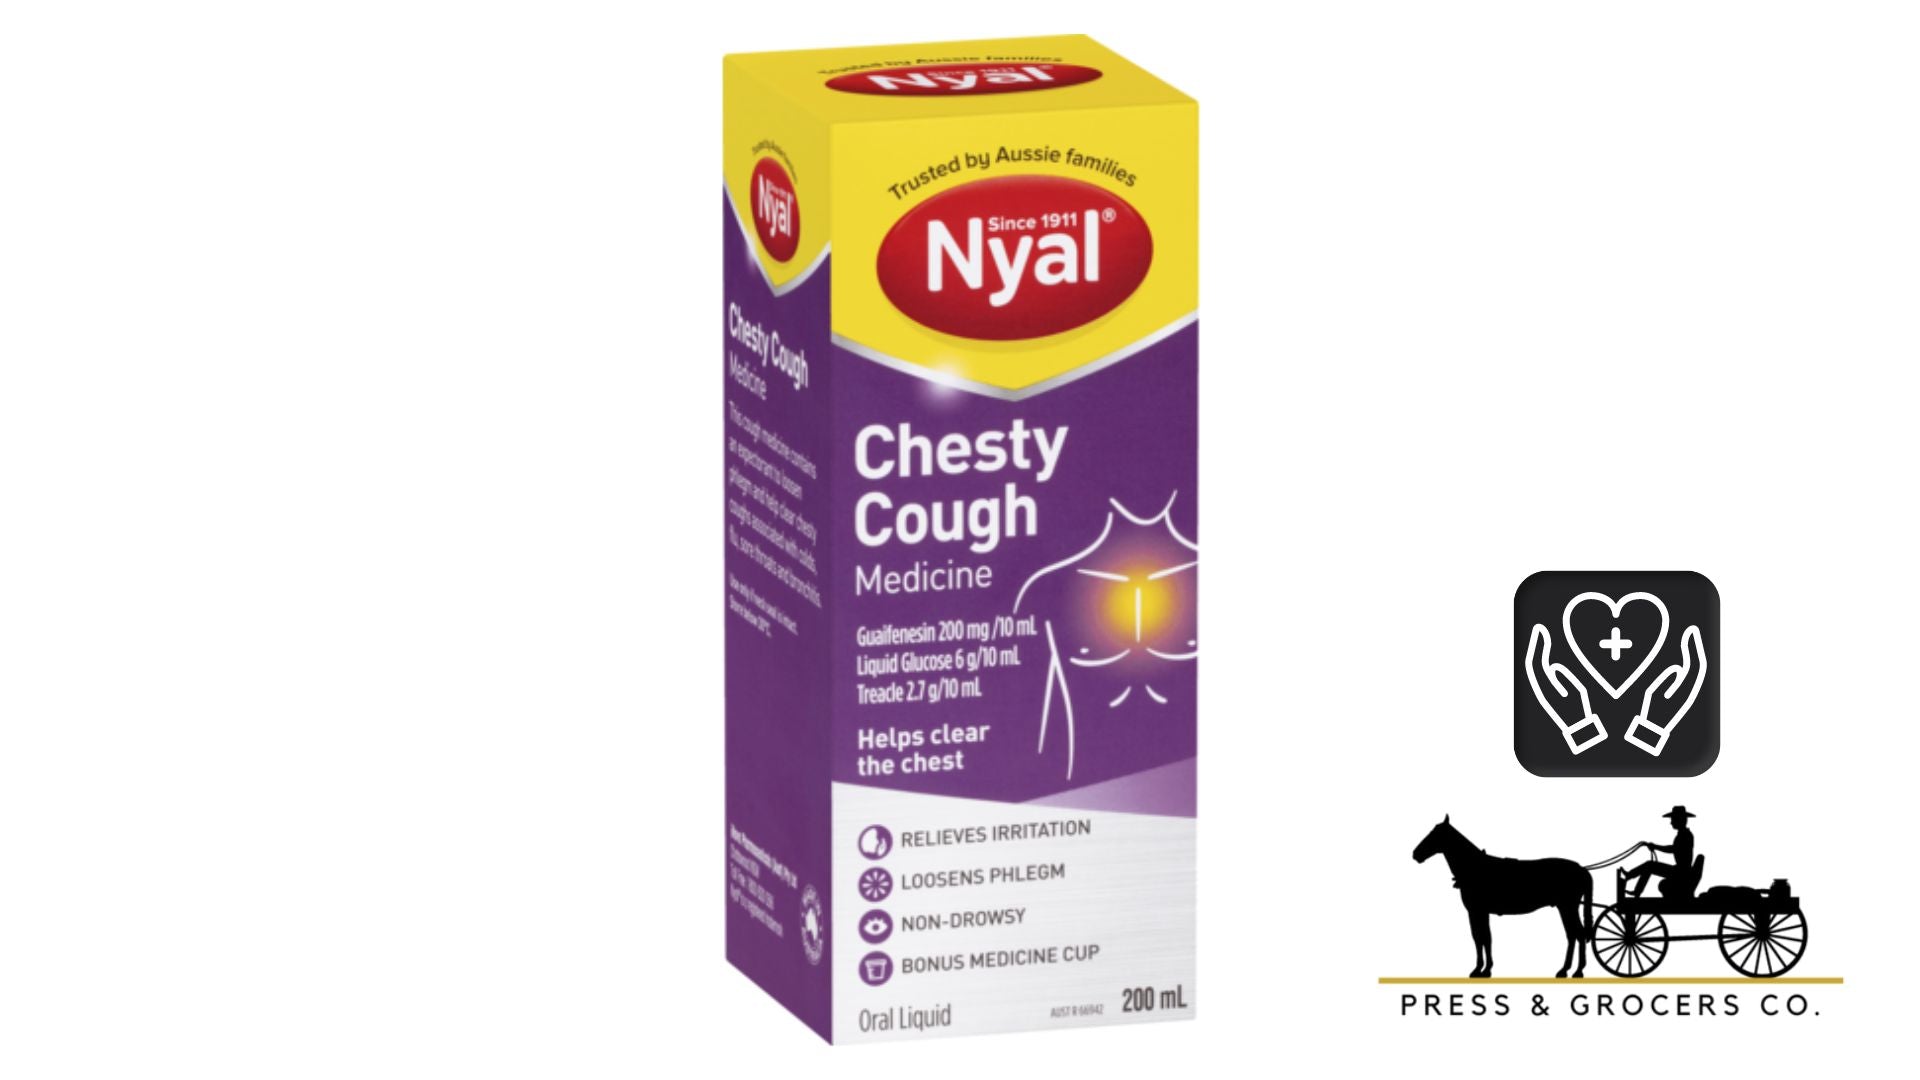 Nyal Chesty Cough Medicine 200ml